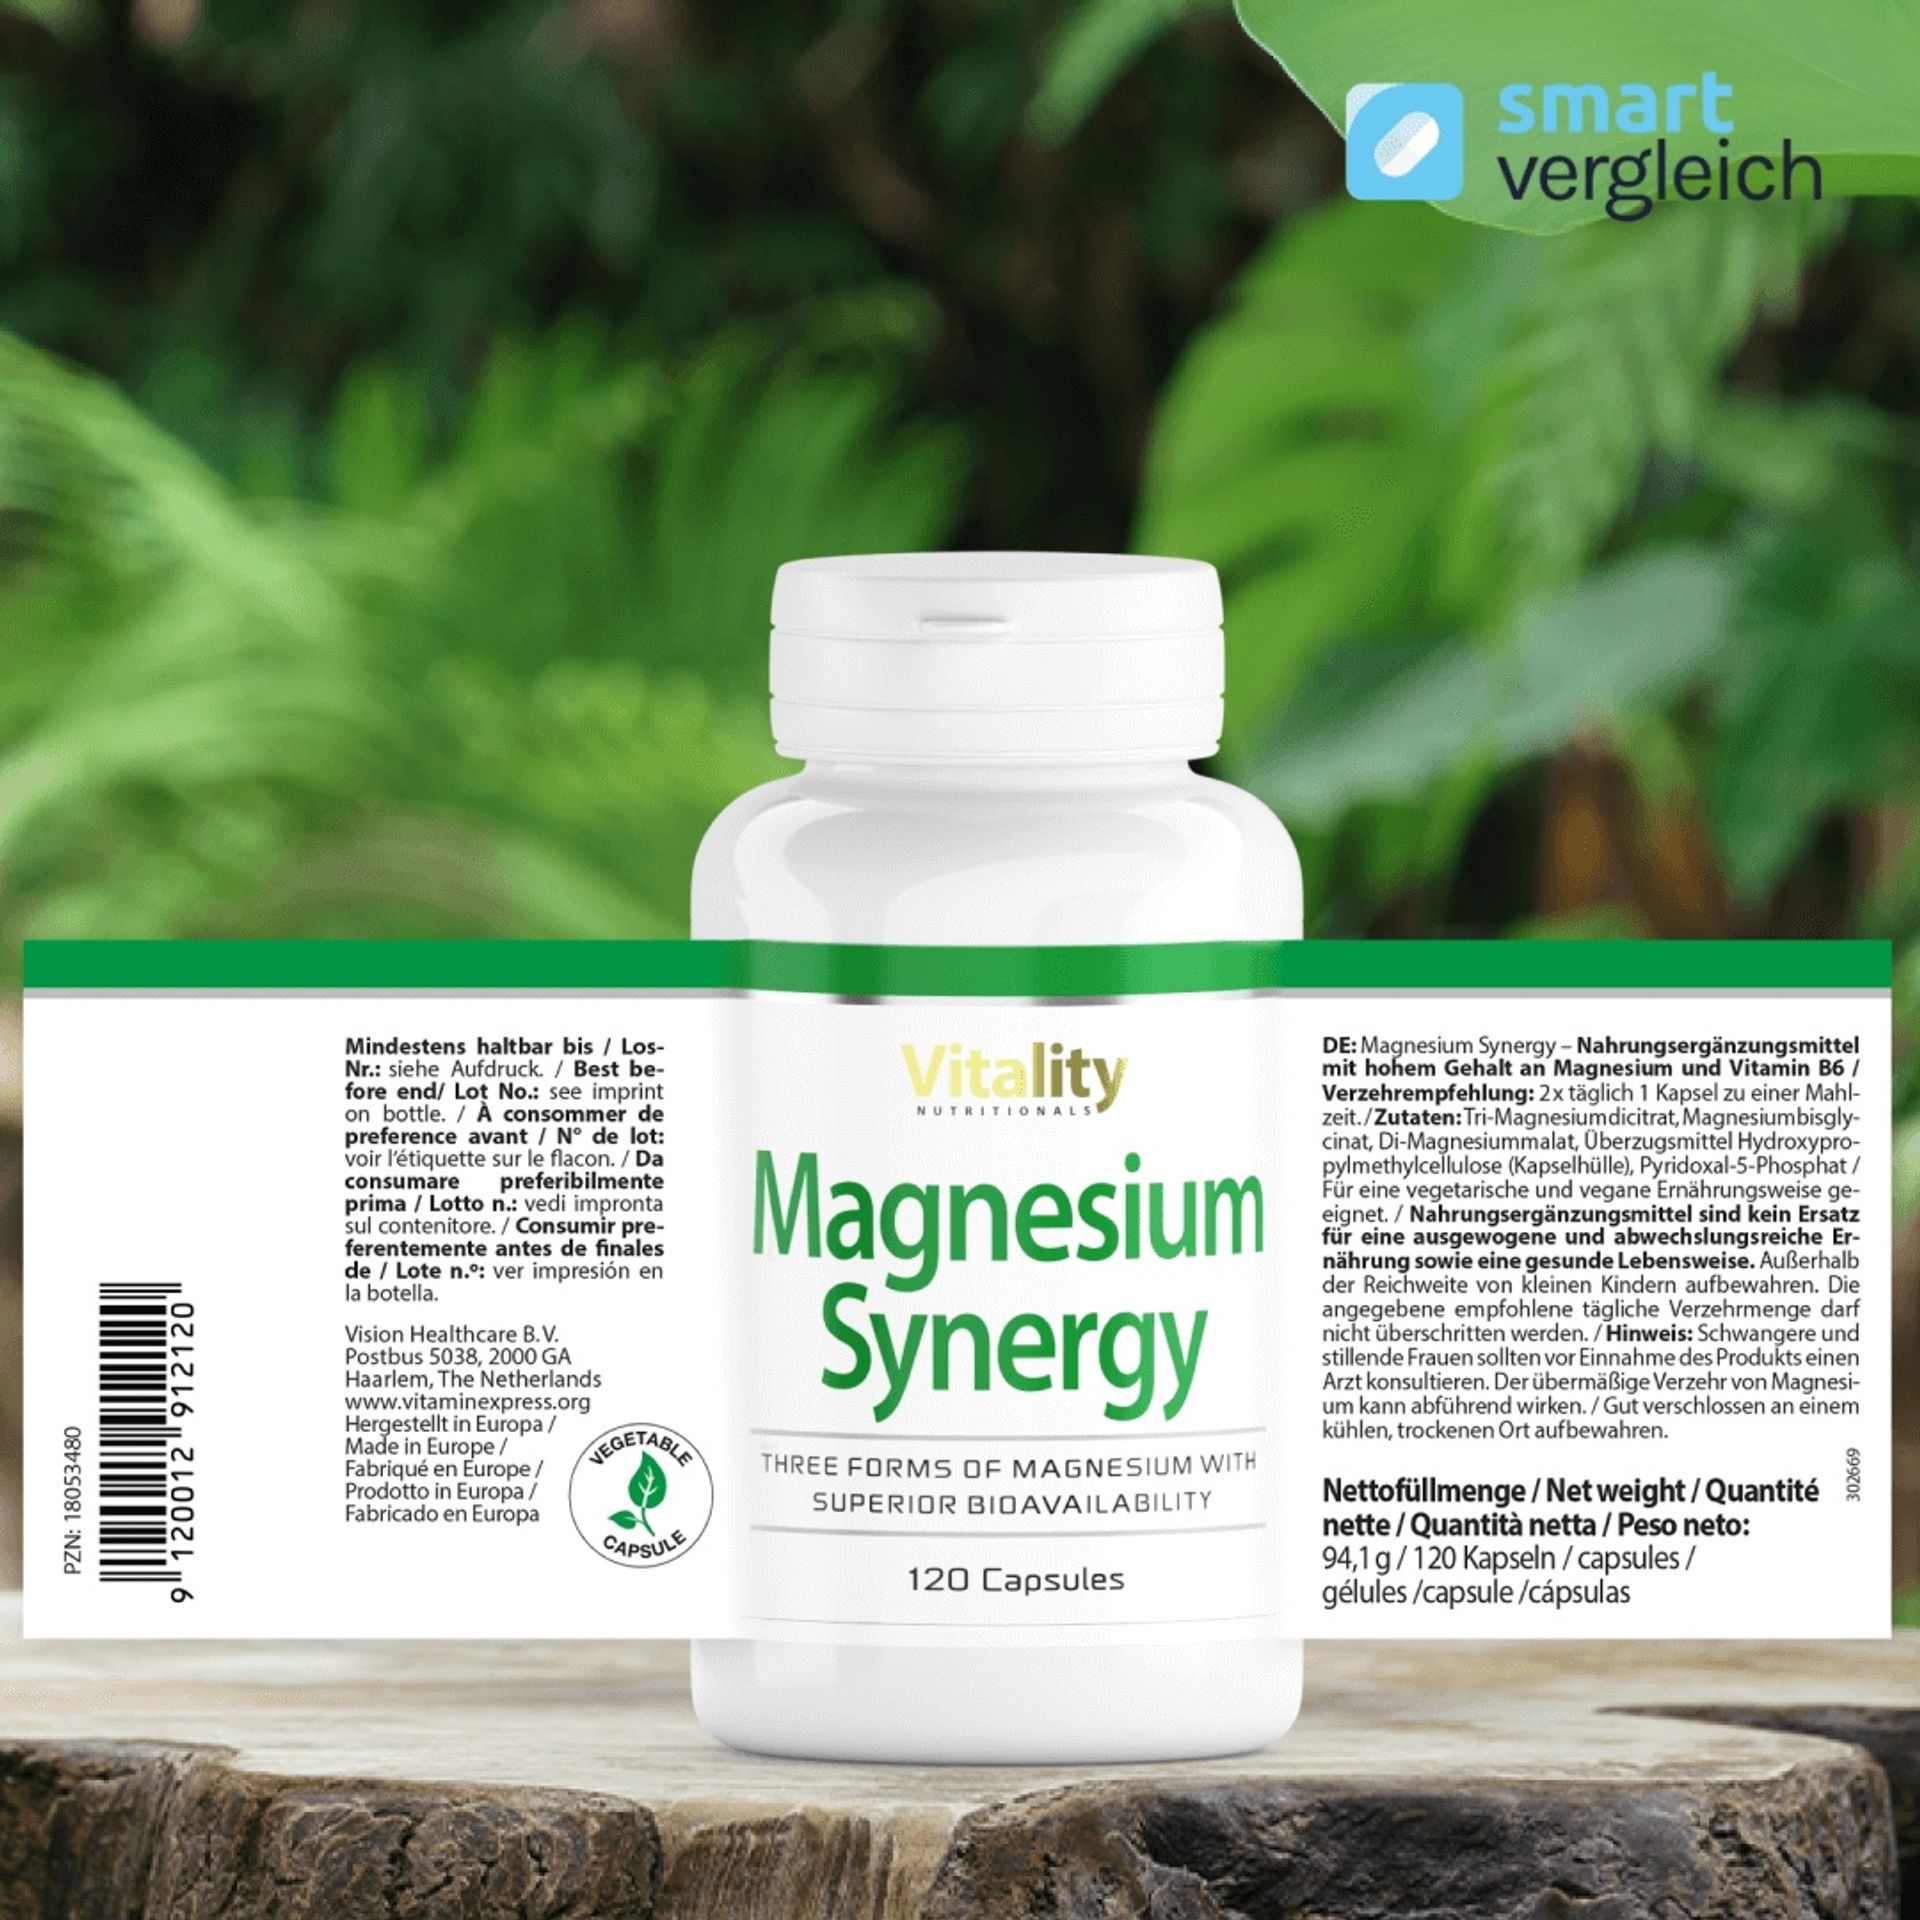 1.4_Magnesium-Synergy-2-1.png